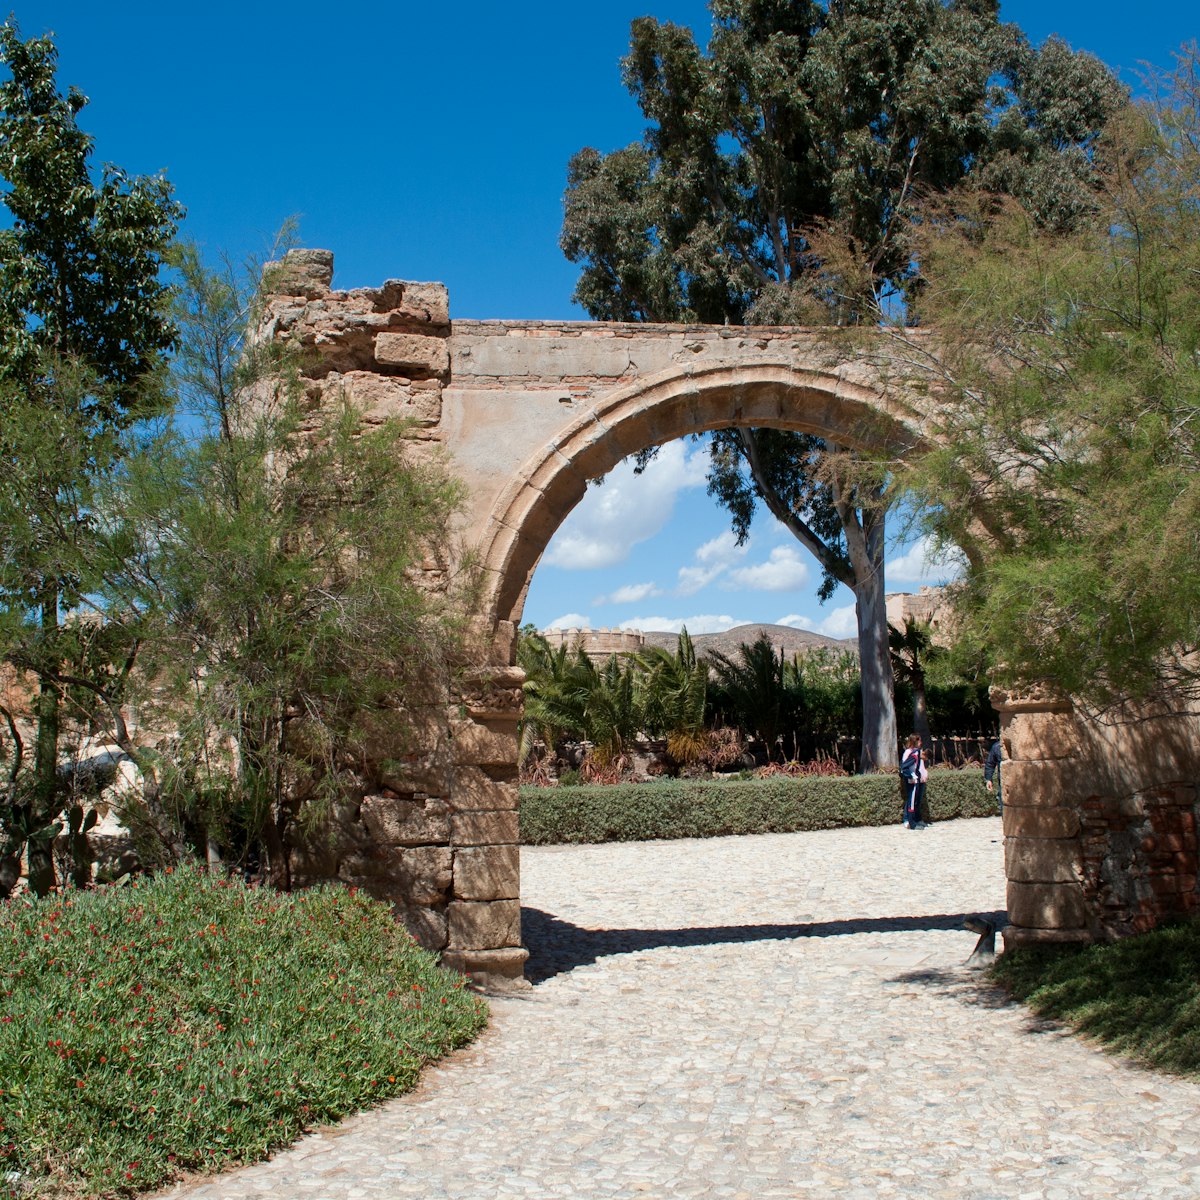 Access arch from the first to the second enclosure in the Alcazaba of Almeria.